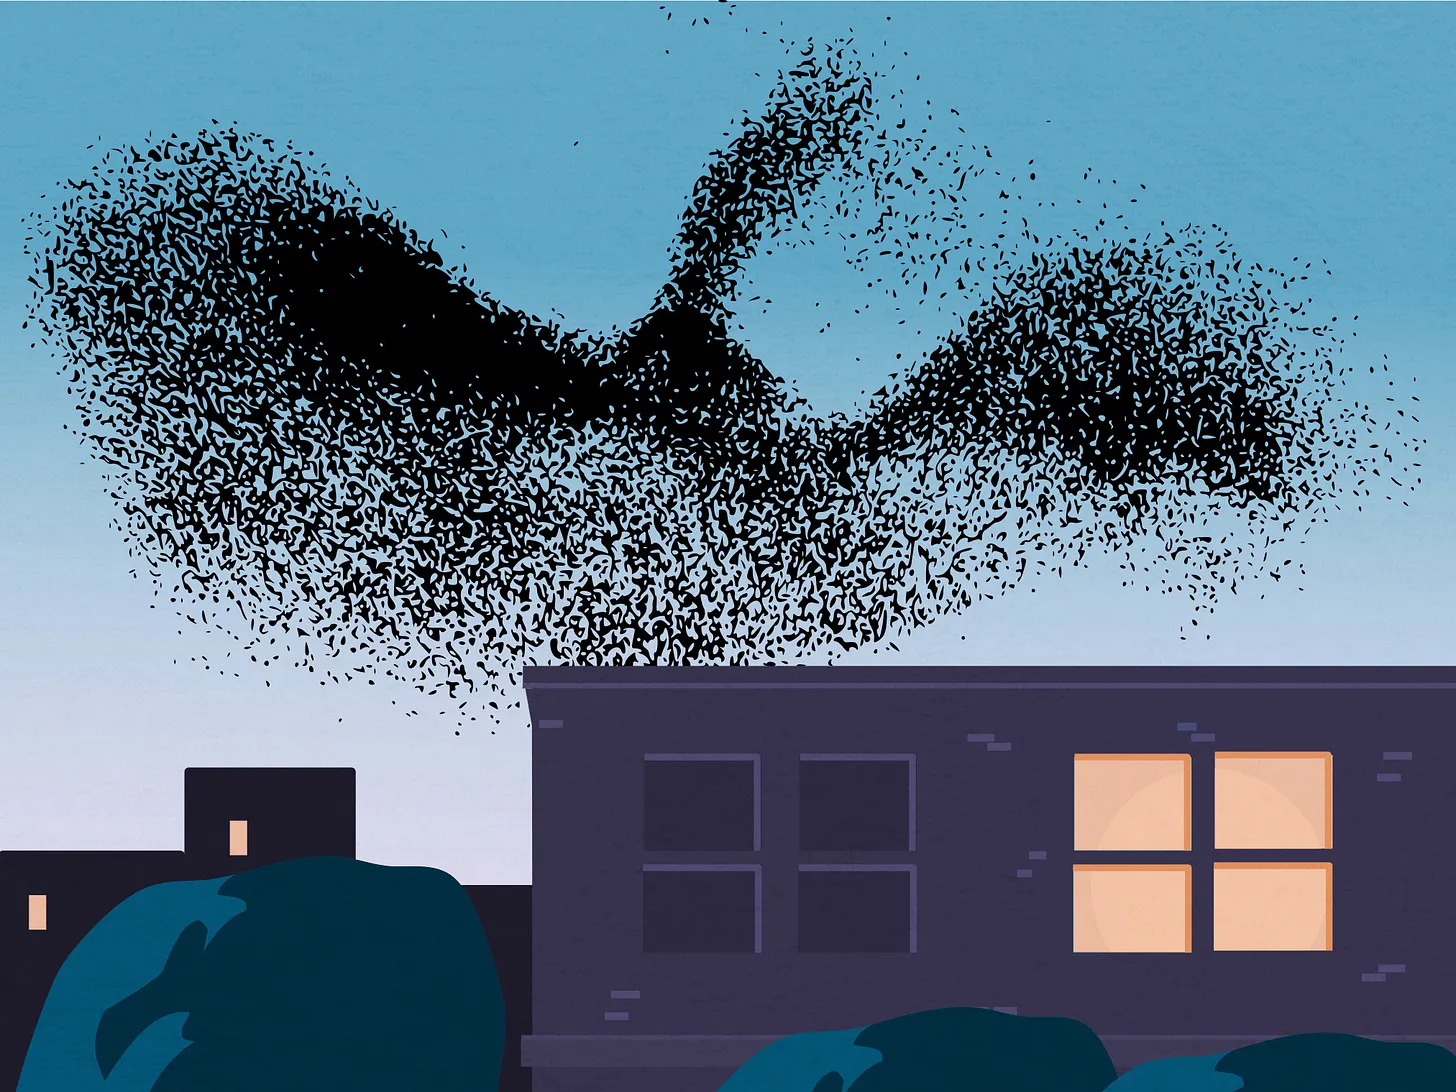 Illustration of starlings flying above a building.